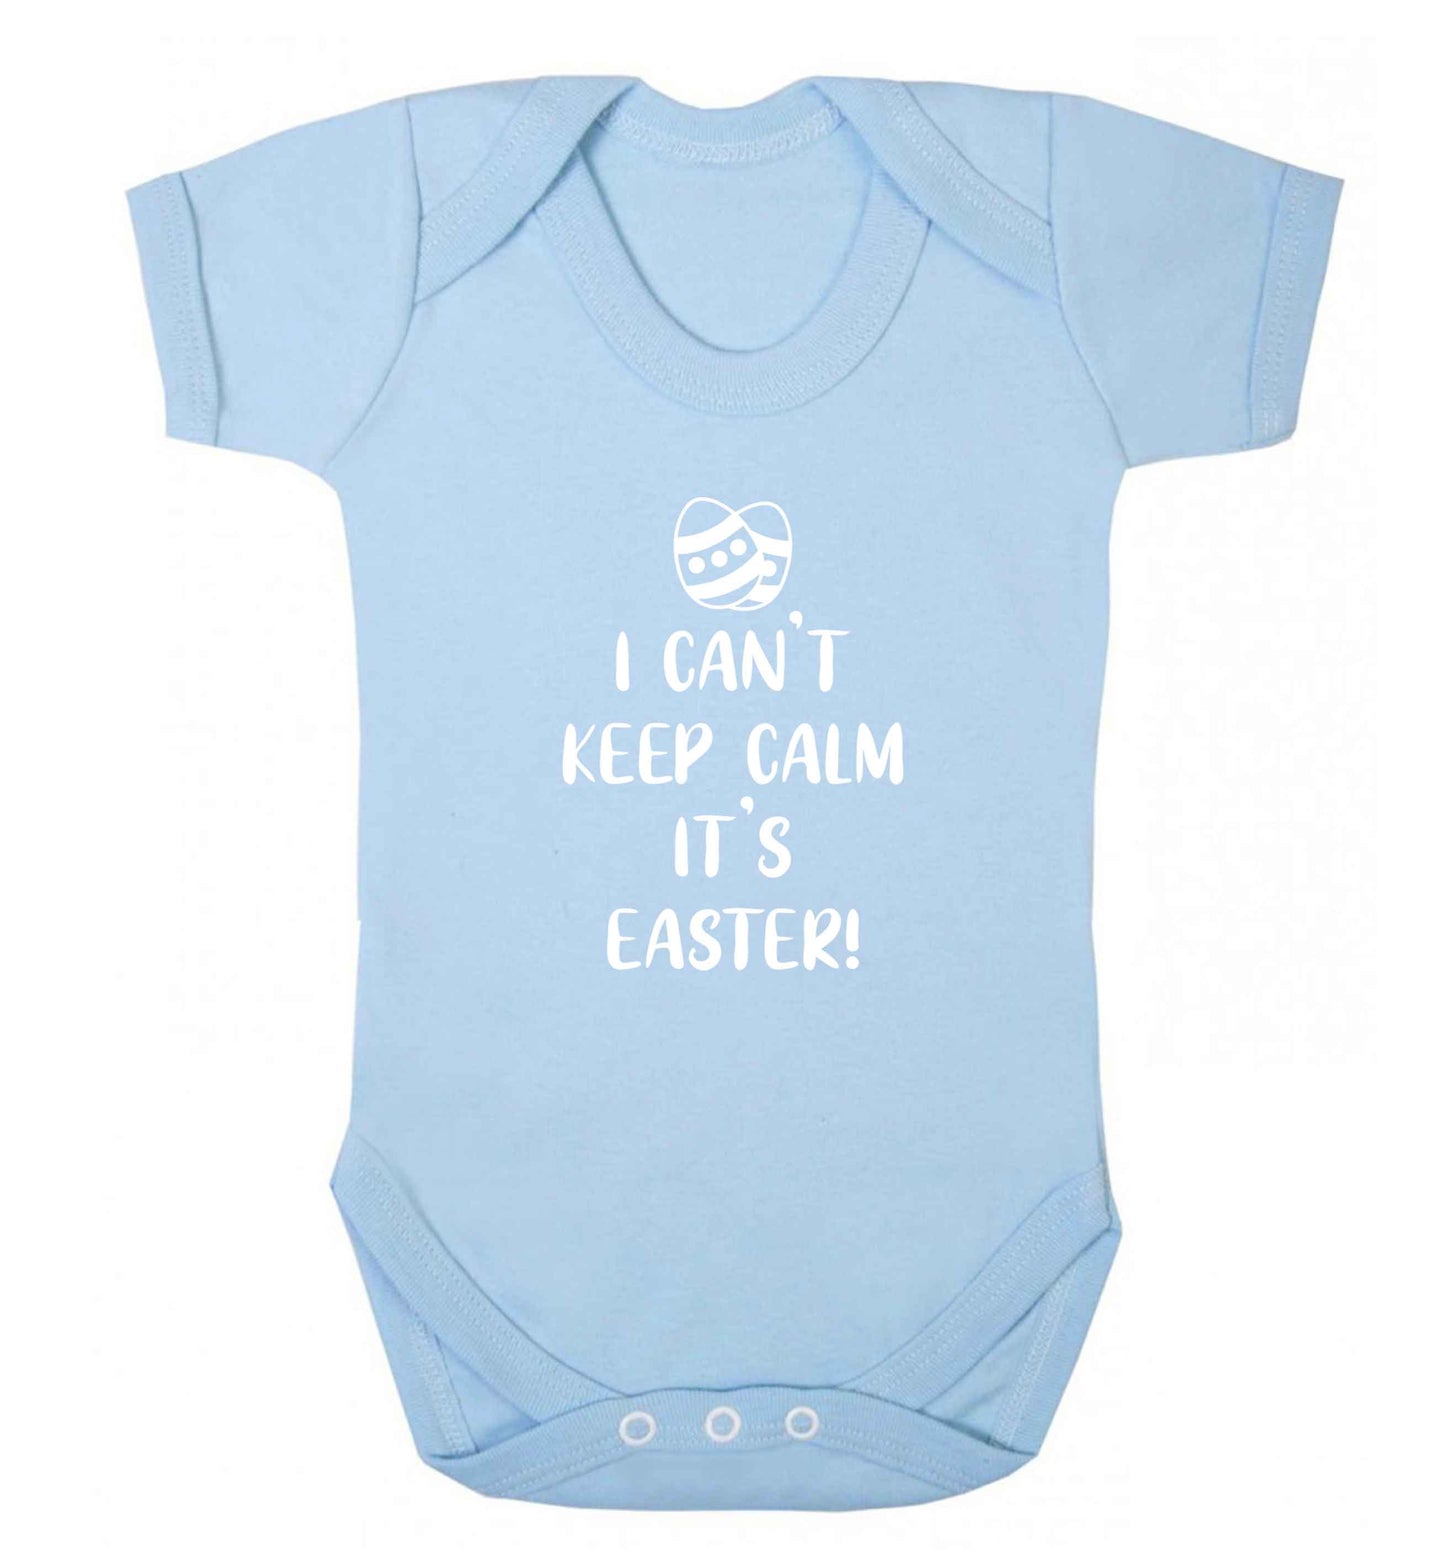 I can't keep calm it's Easter baby vest pale blue 18-24 months